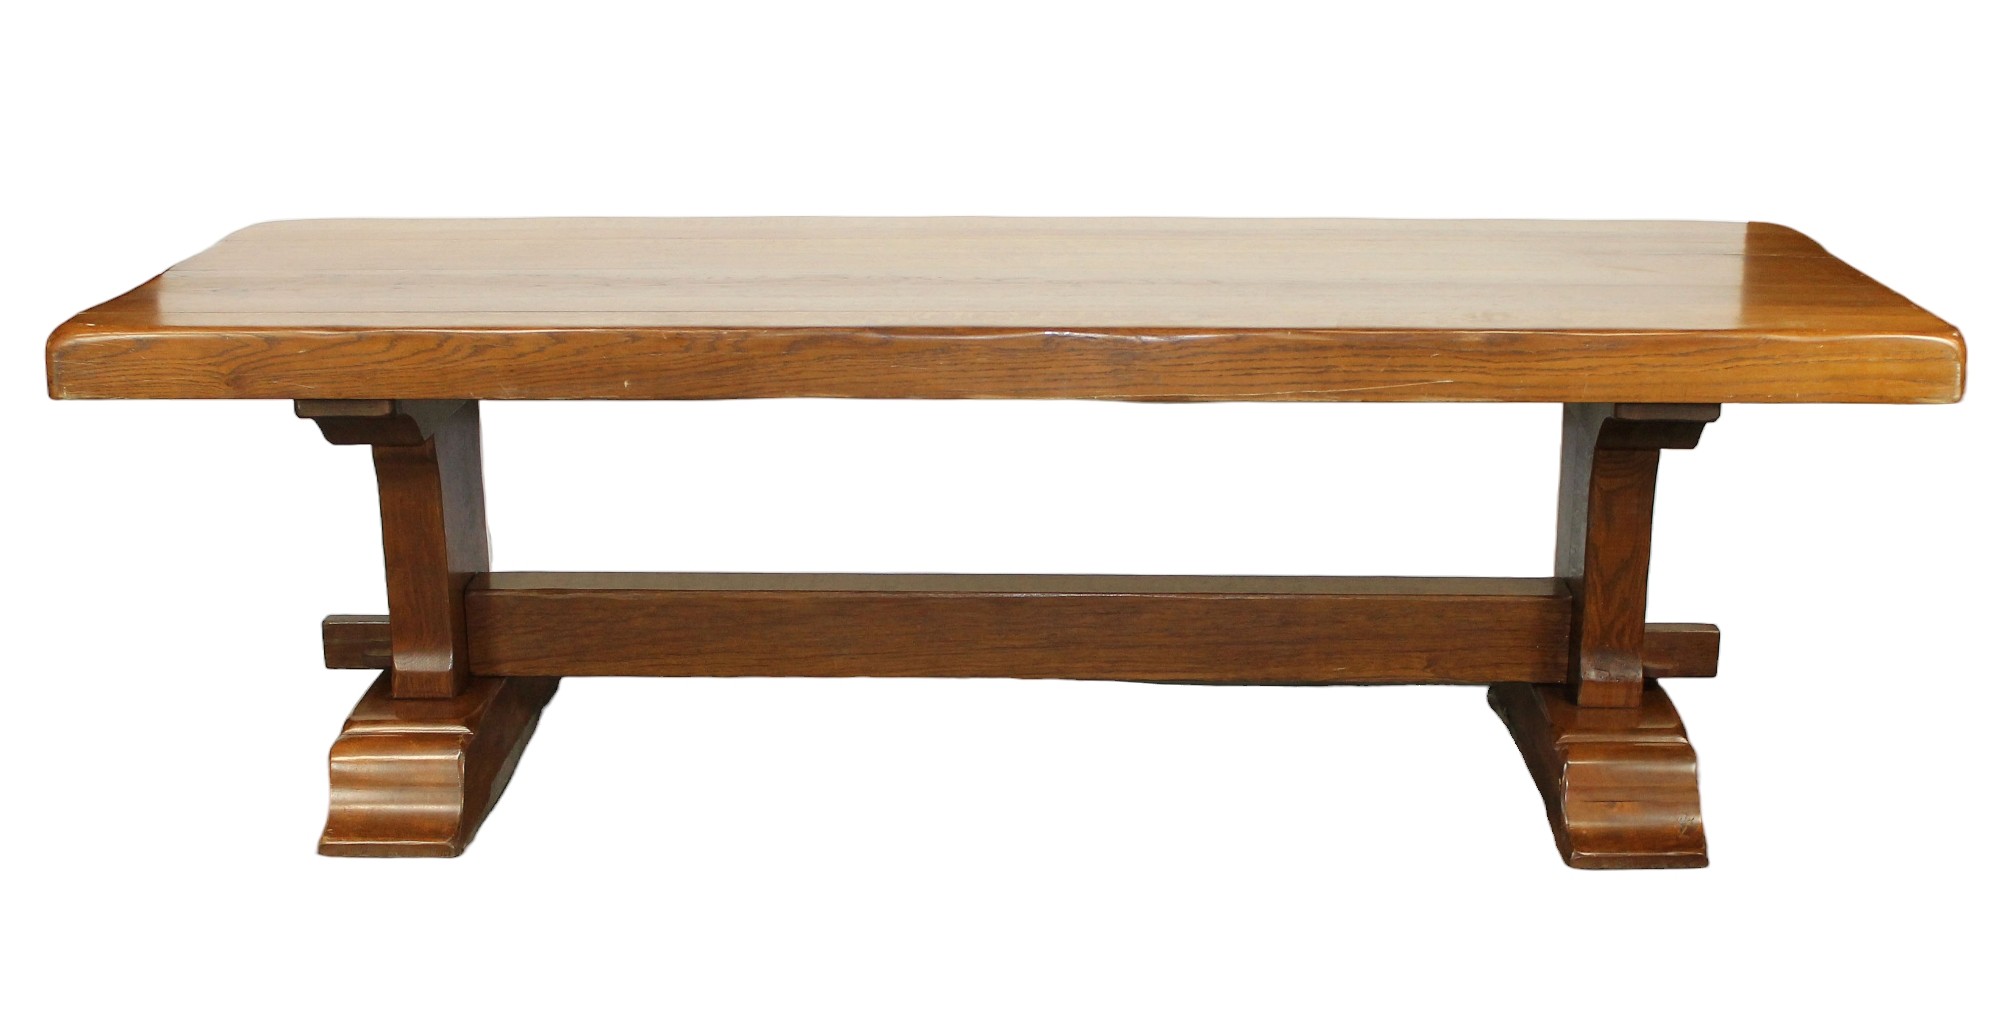 French oak 4" thick top trestle table